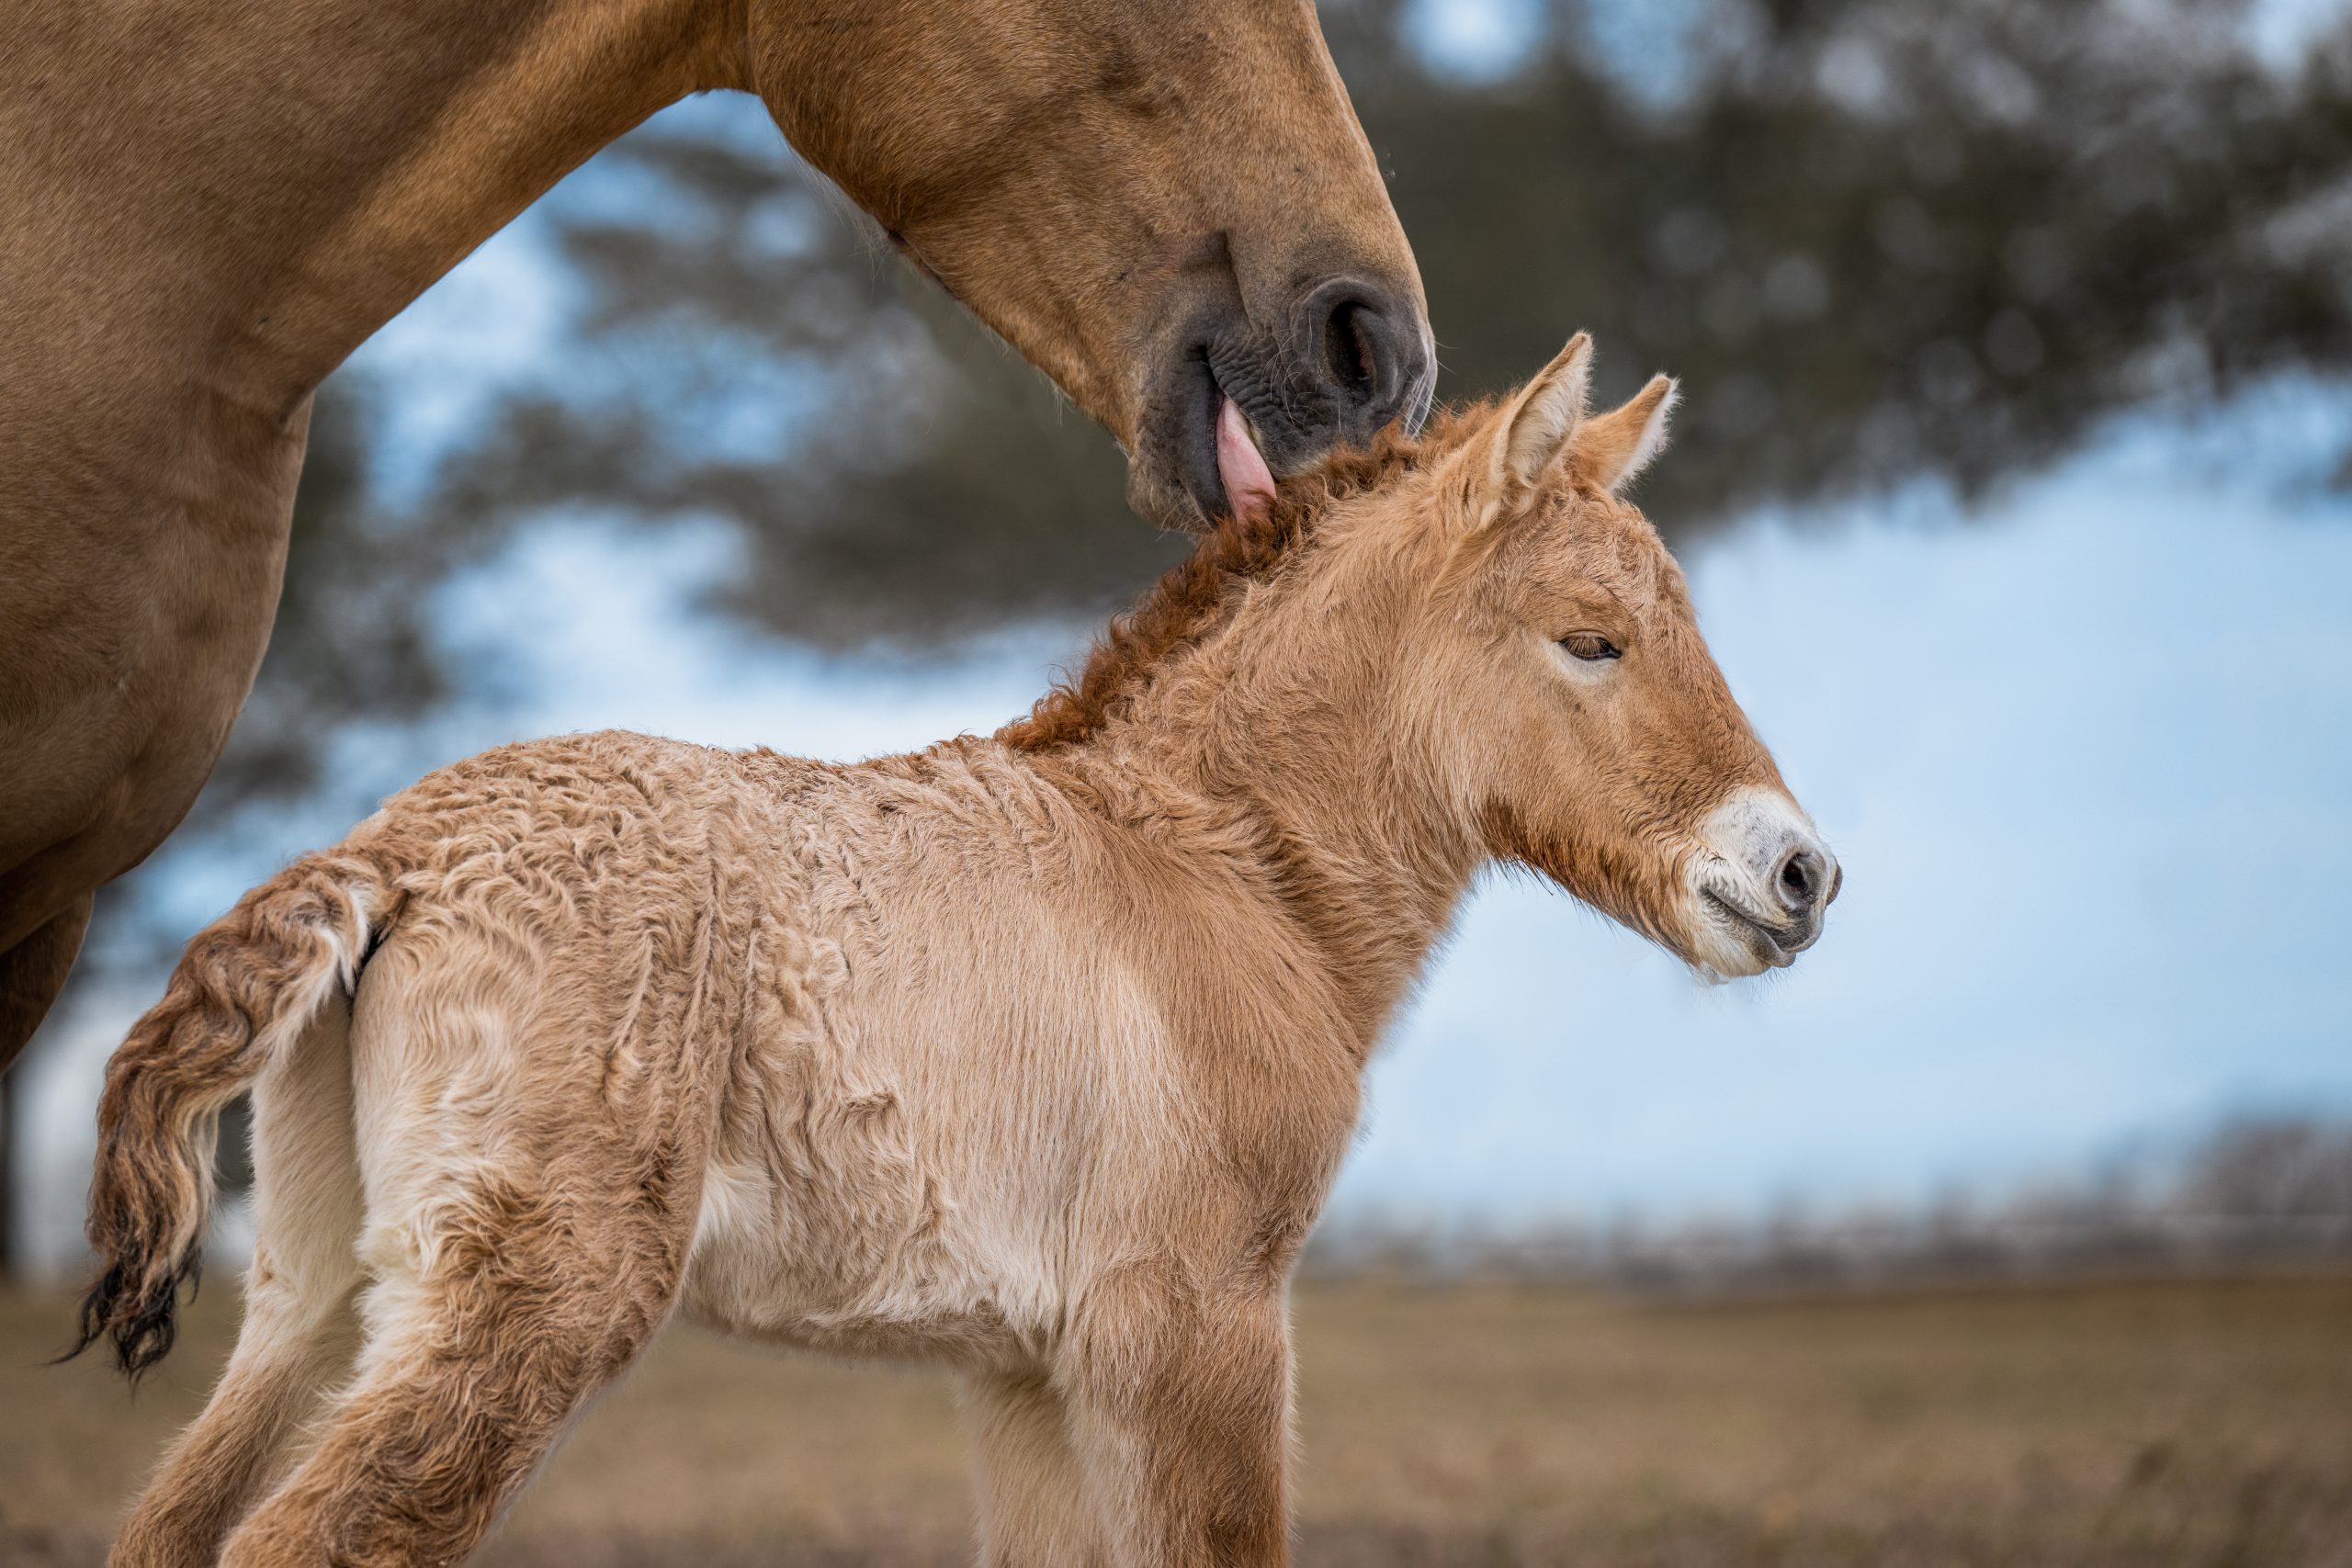 5-day-old Przewalski’s horse clone and his domestic horse mother at the ViaGen facility in Texas. Credit: Elizabeth Arellano Photography